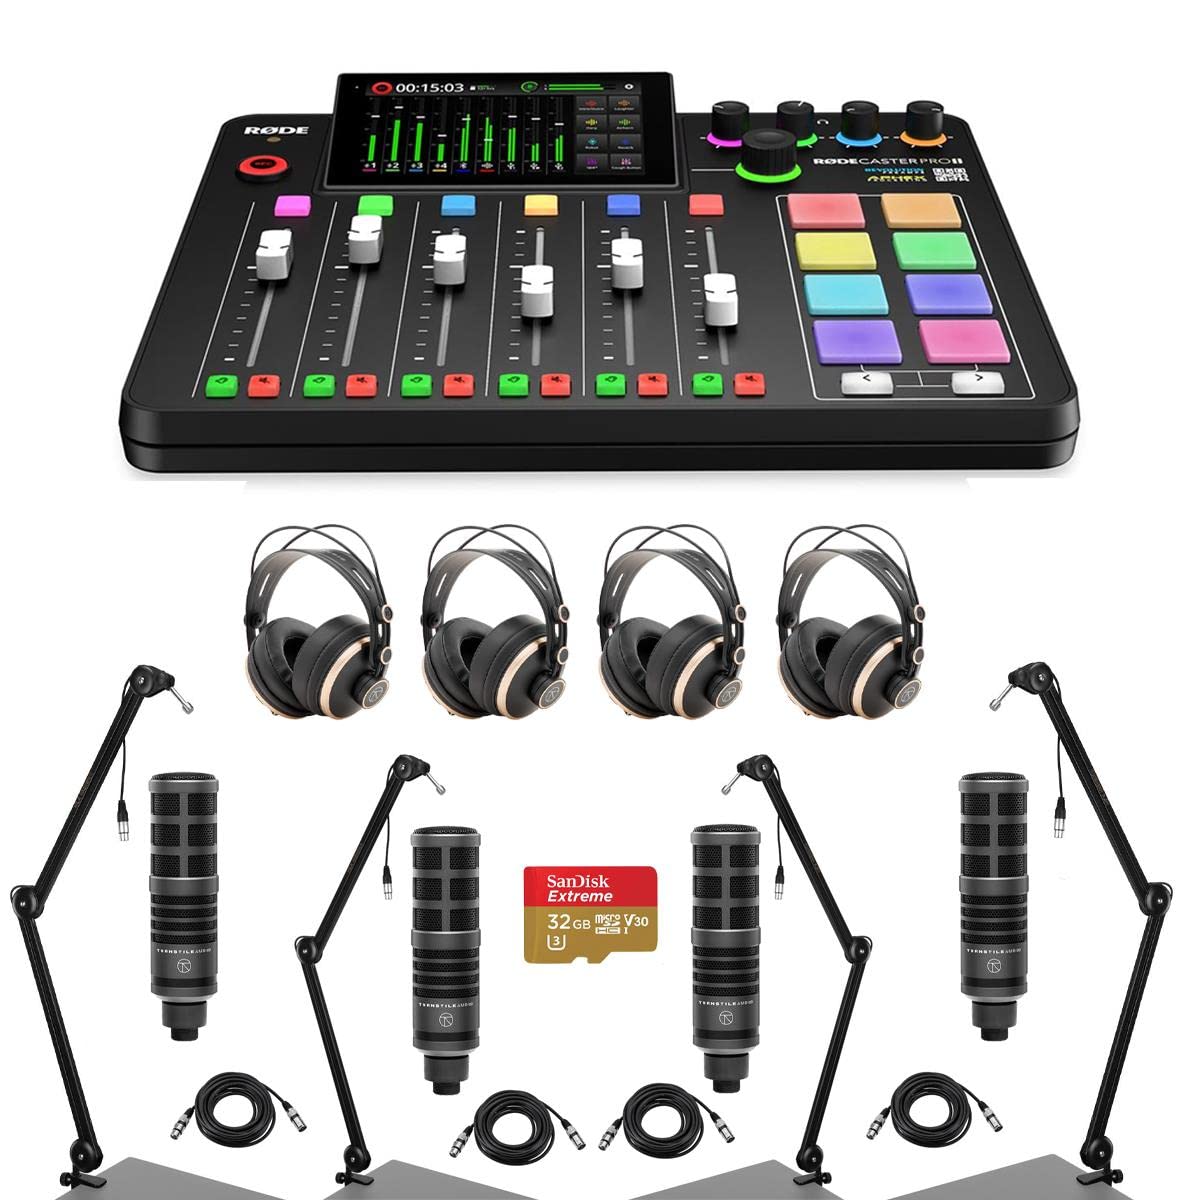 Rode RODECaster Pro II Integrated Audio Production Studio Console Bundle with 4x Turnstile Audio Dynamic Broadcast Microphone, 4x Headphones, 4x Broadcast Arm, 4x XLR M to F Cable, 32GB Memory Card